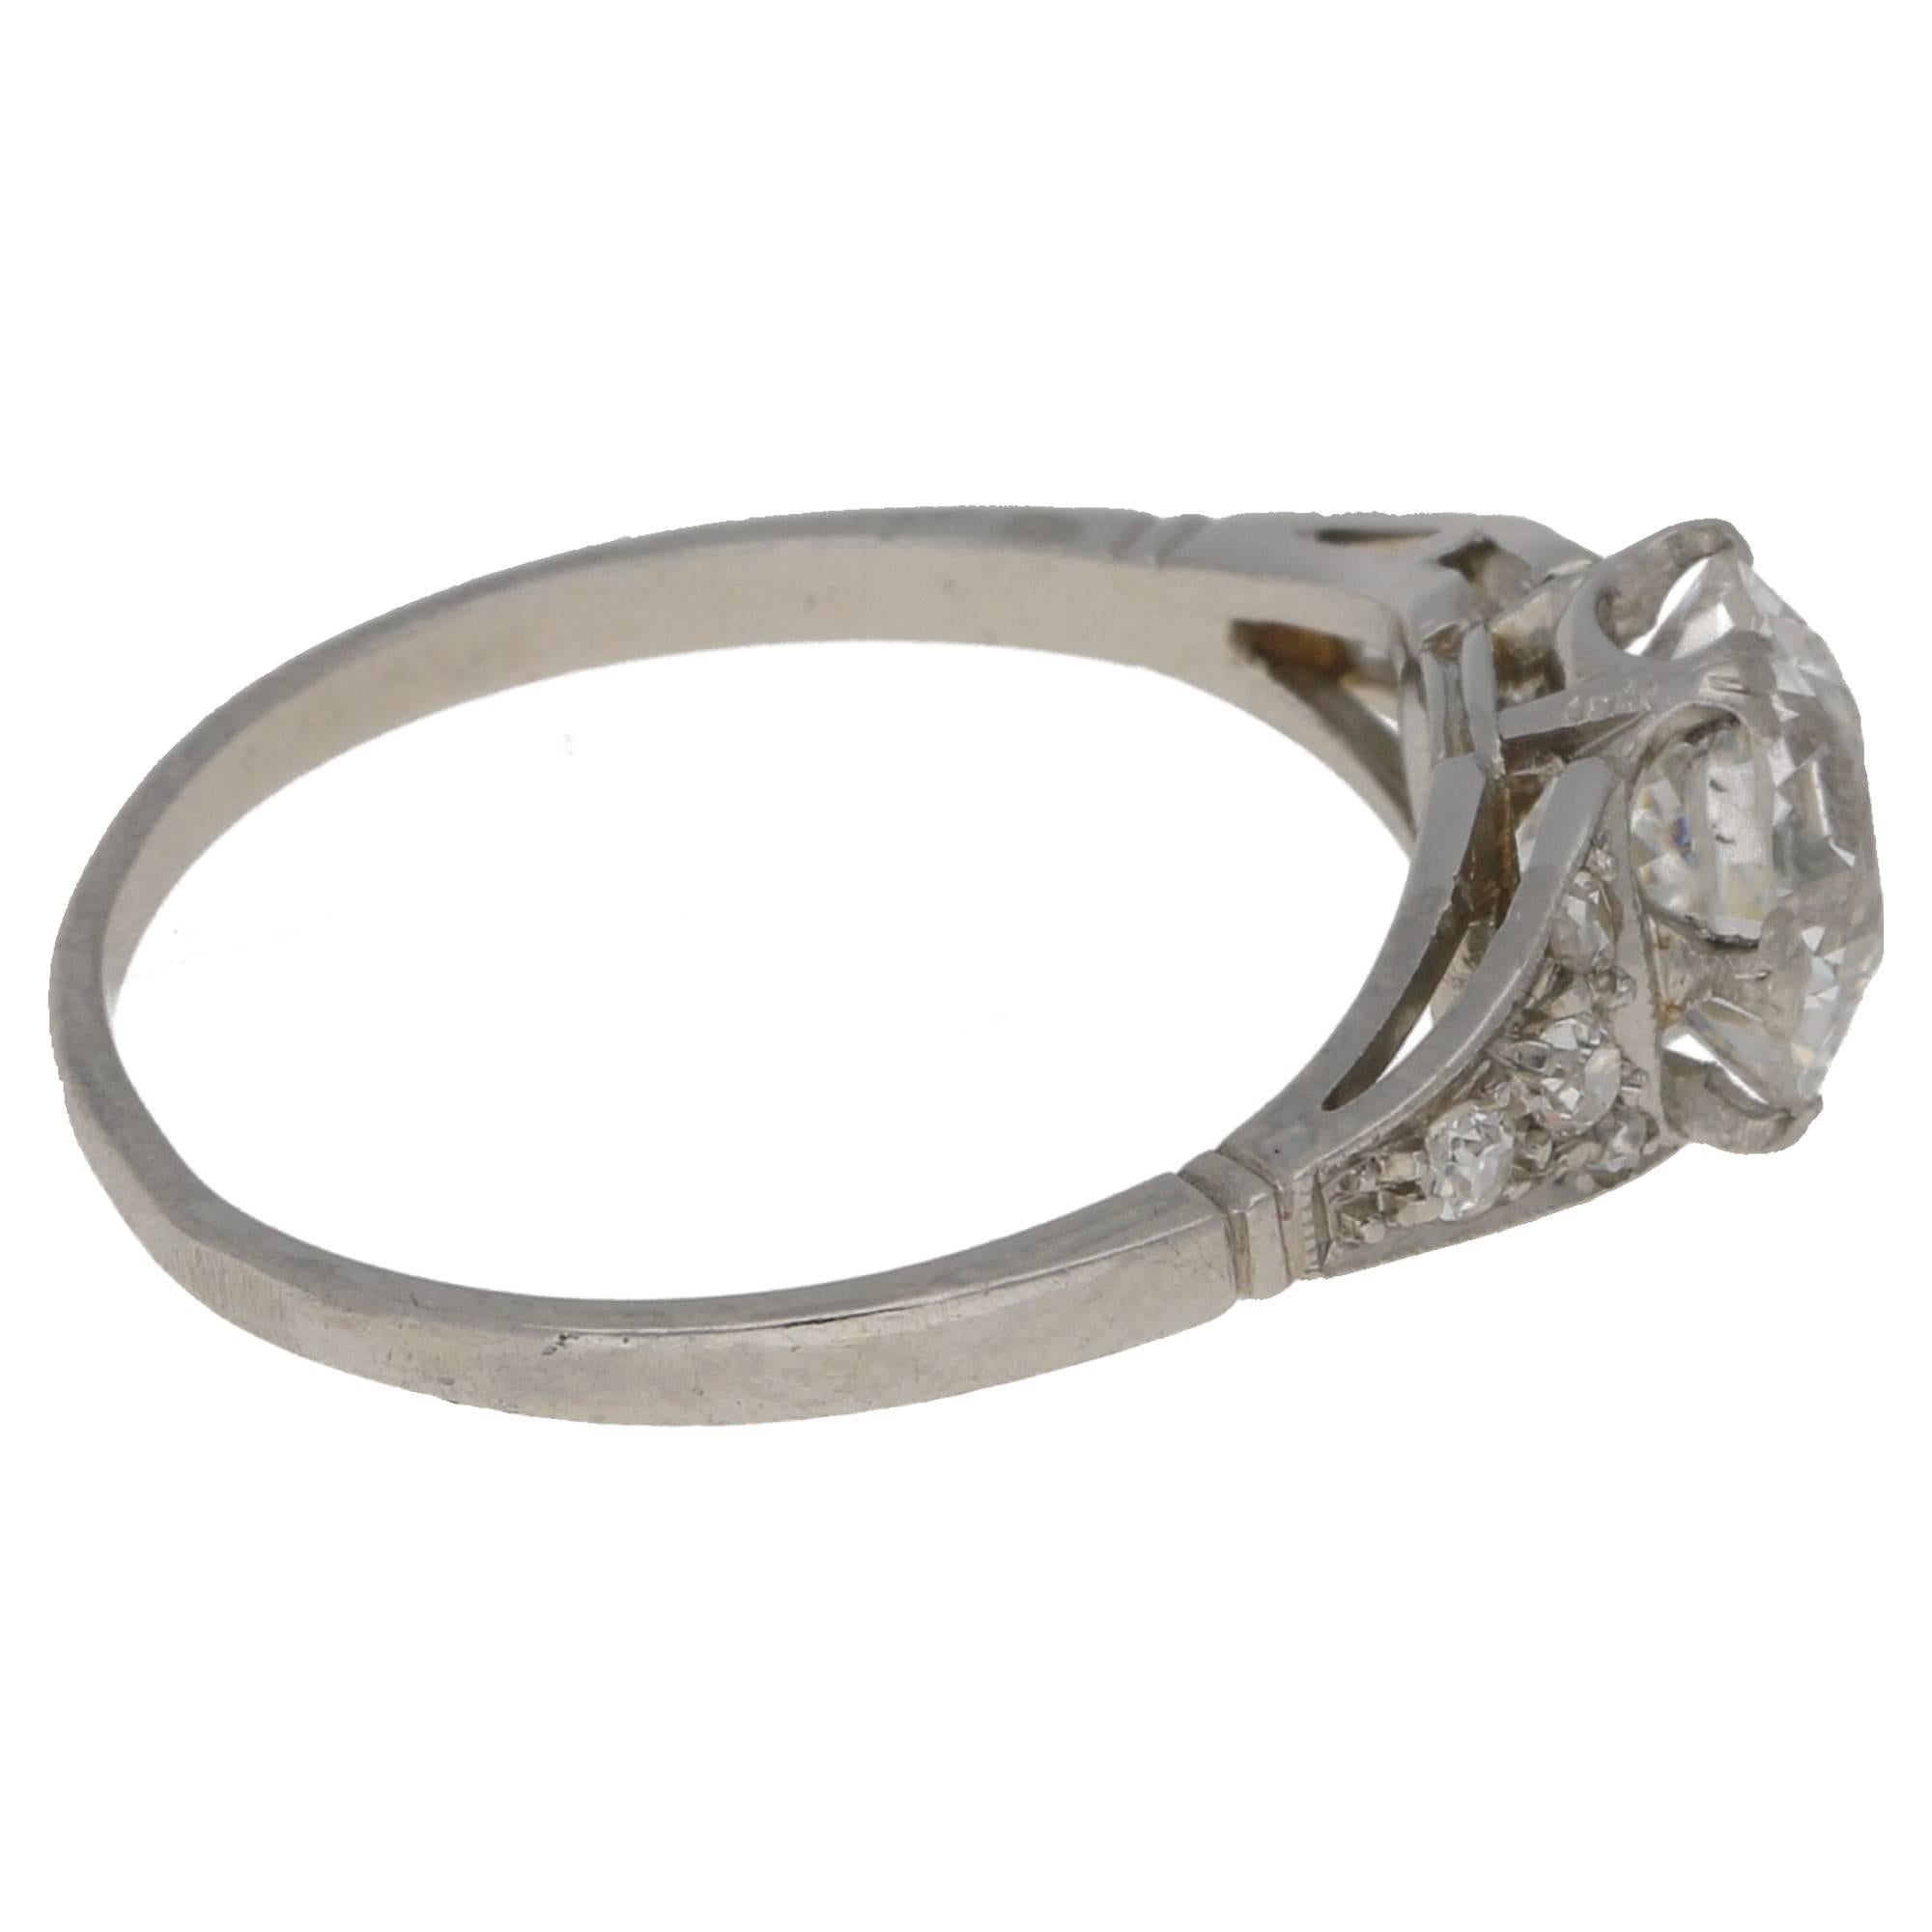 A unique and gracefully styled Art Nouveau diamond set ring. The centrally set transitional round brilliant cut diamond is set with six ridged claws, with fluted diamond set paneled shoulders. Estimated central diamond weight: 1.75cts. Assessed